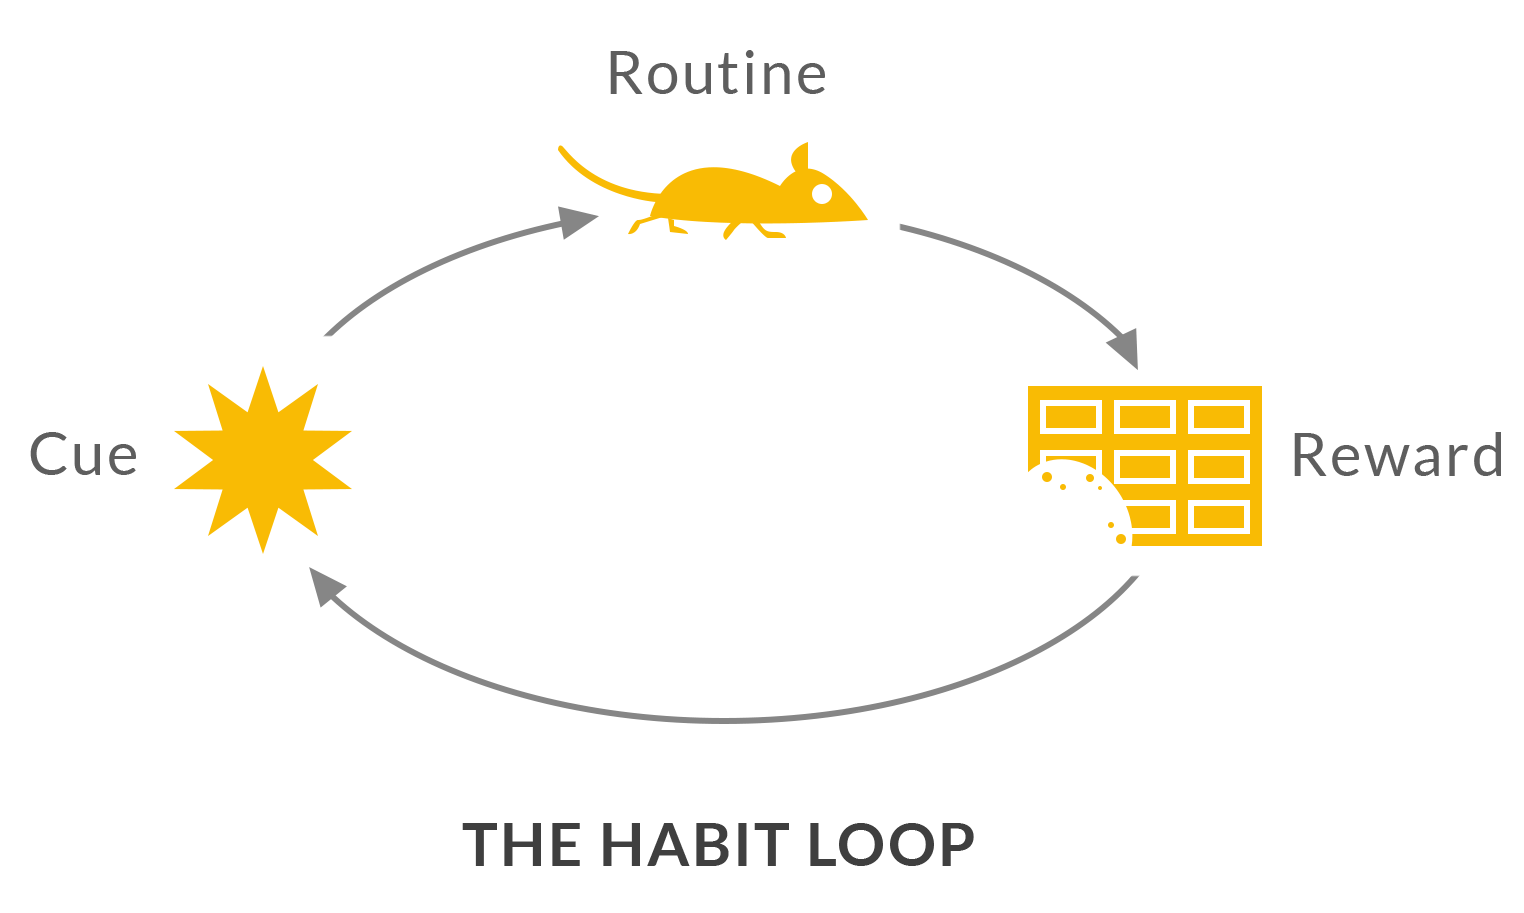 An infographic illustrating the habit loop (cue, routine, reward) to visually summarize the concept for readers.